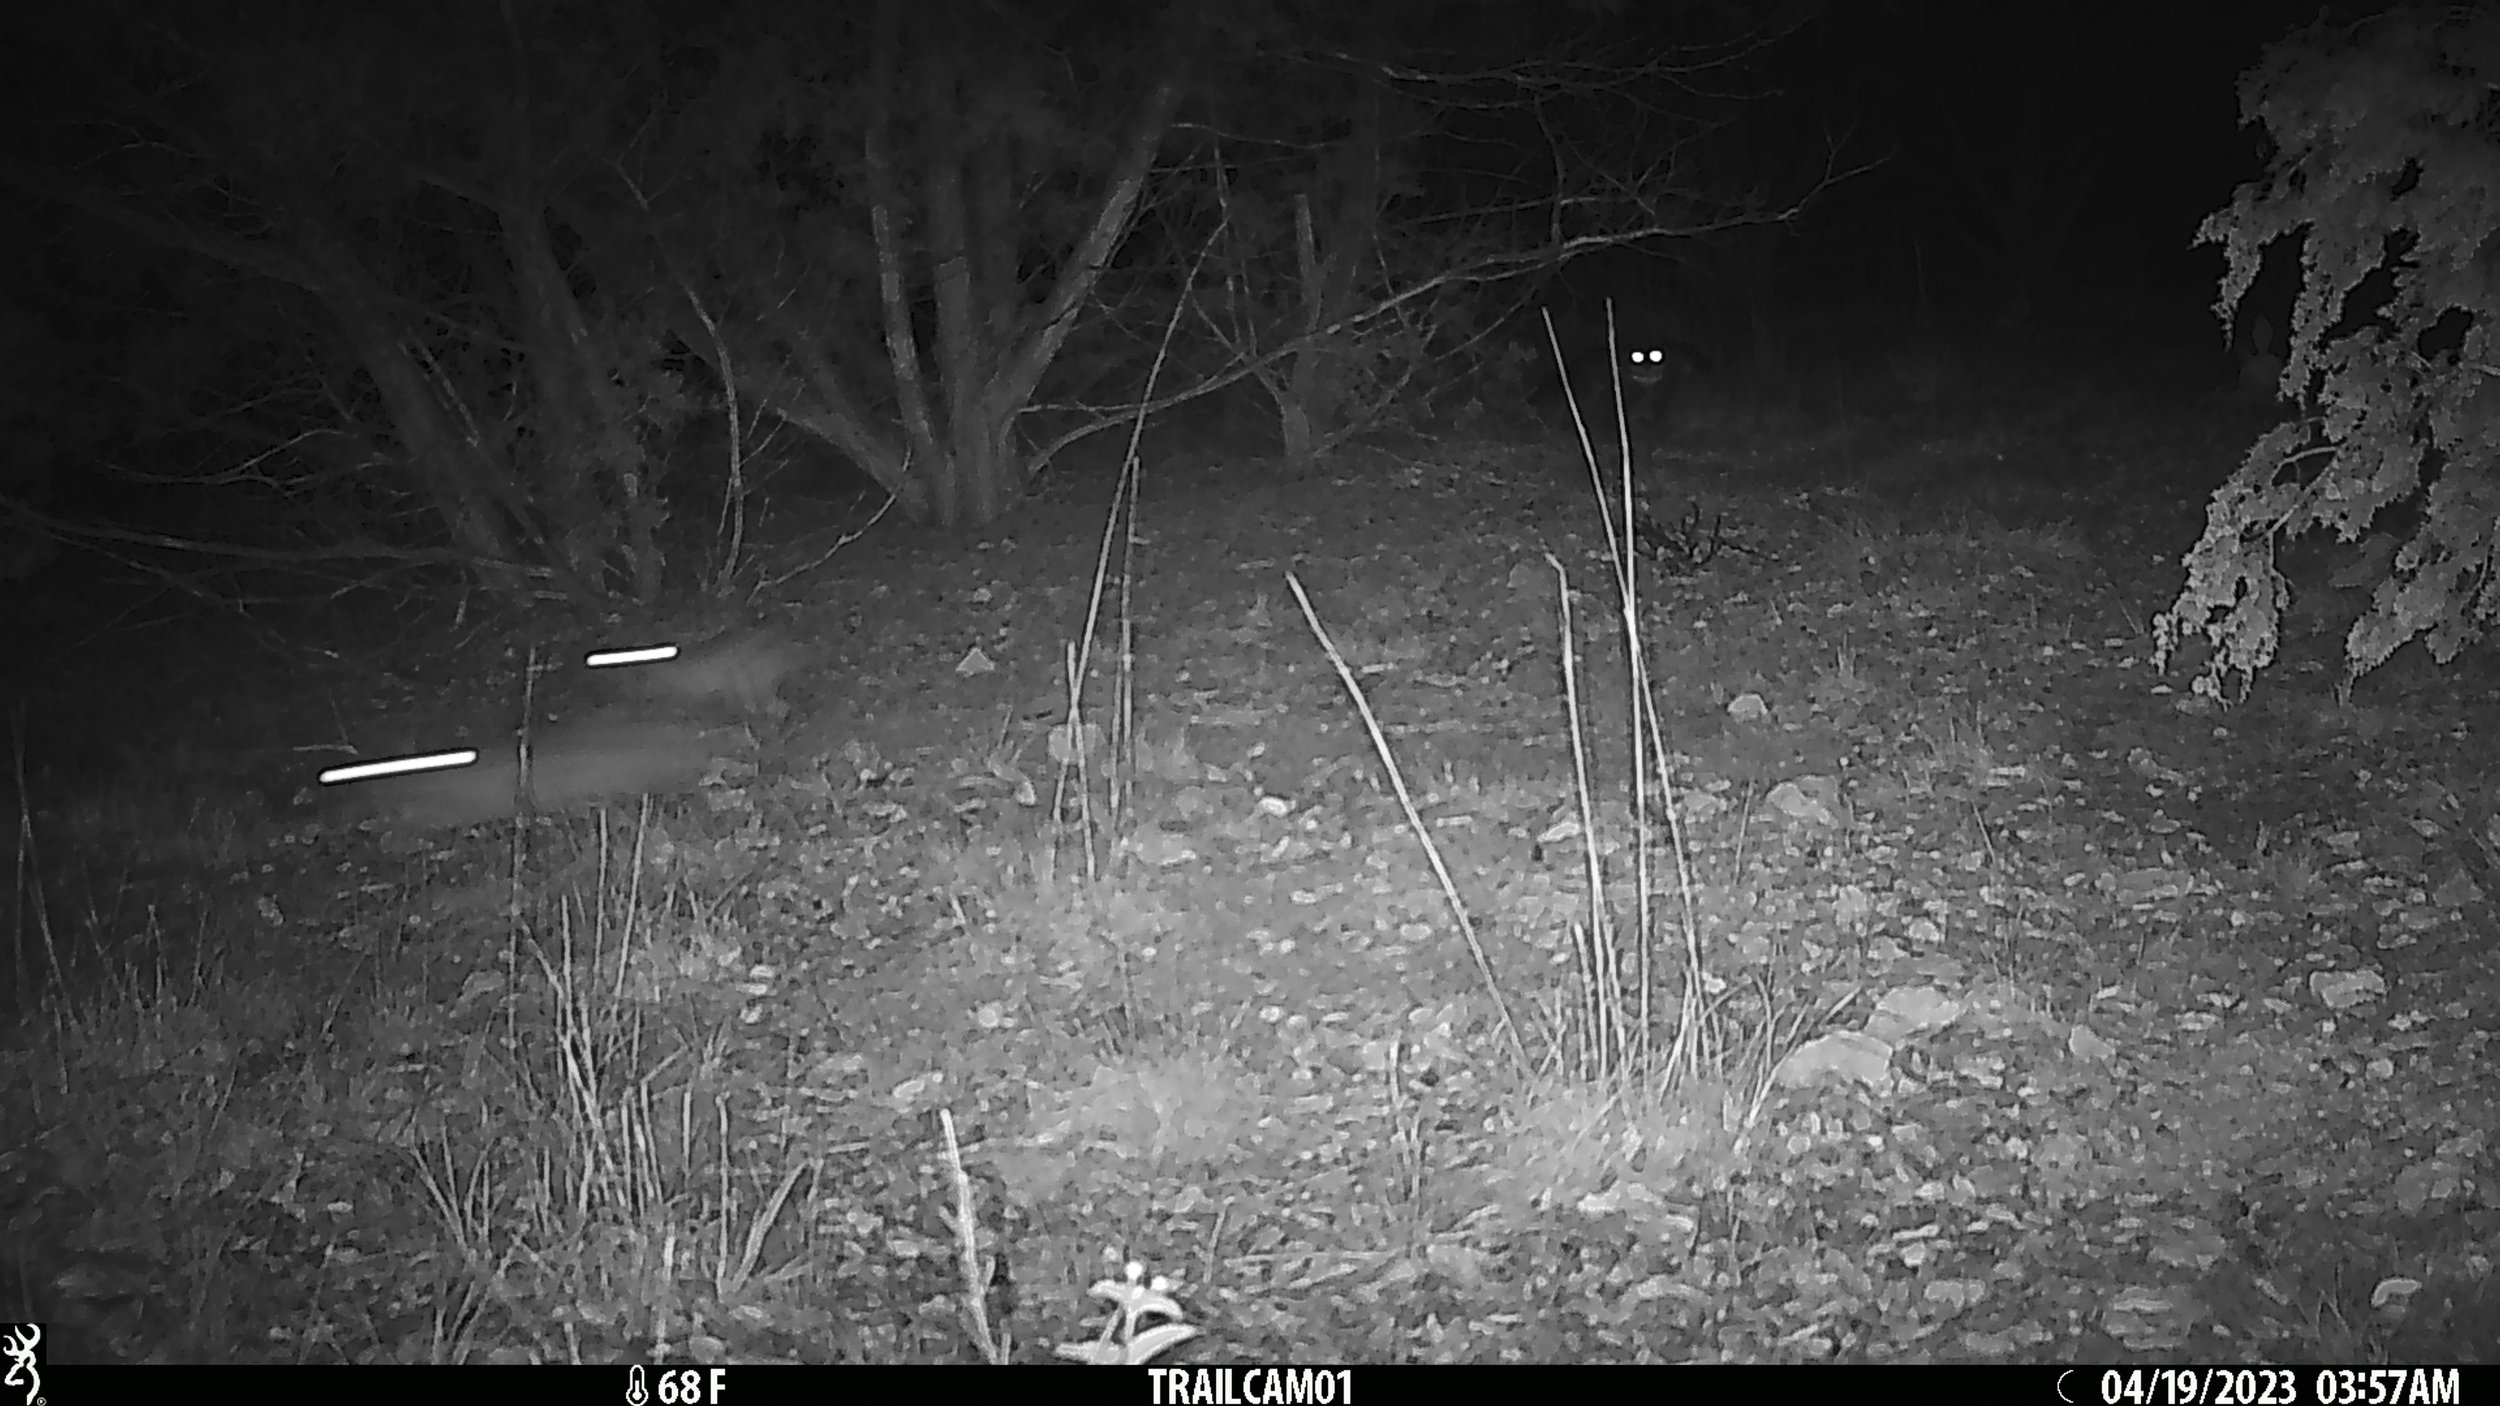 First of two images. see owl eyes on right. Rabbits fleeing on left